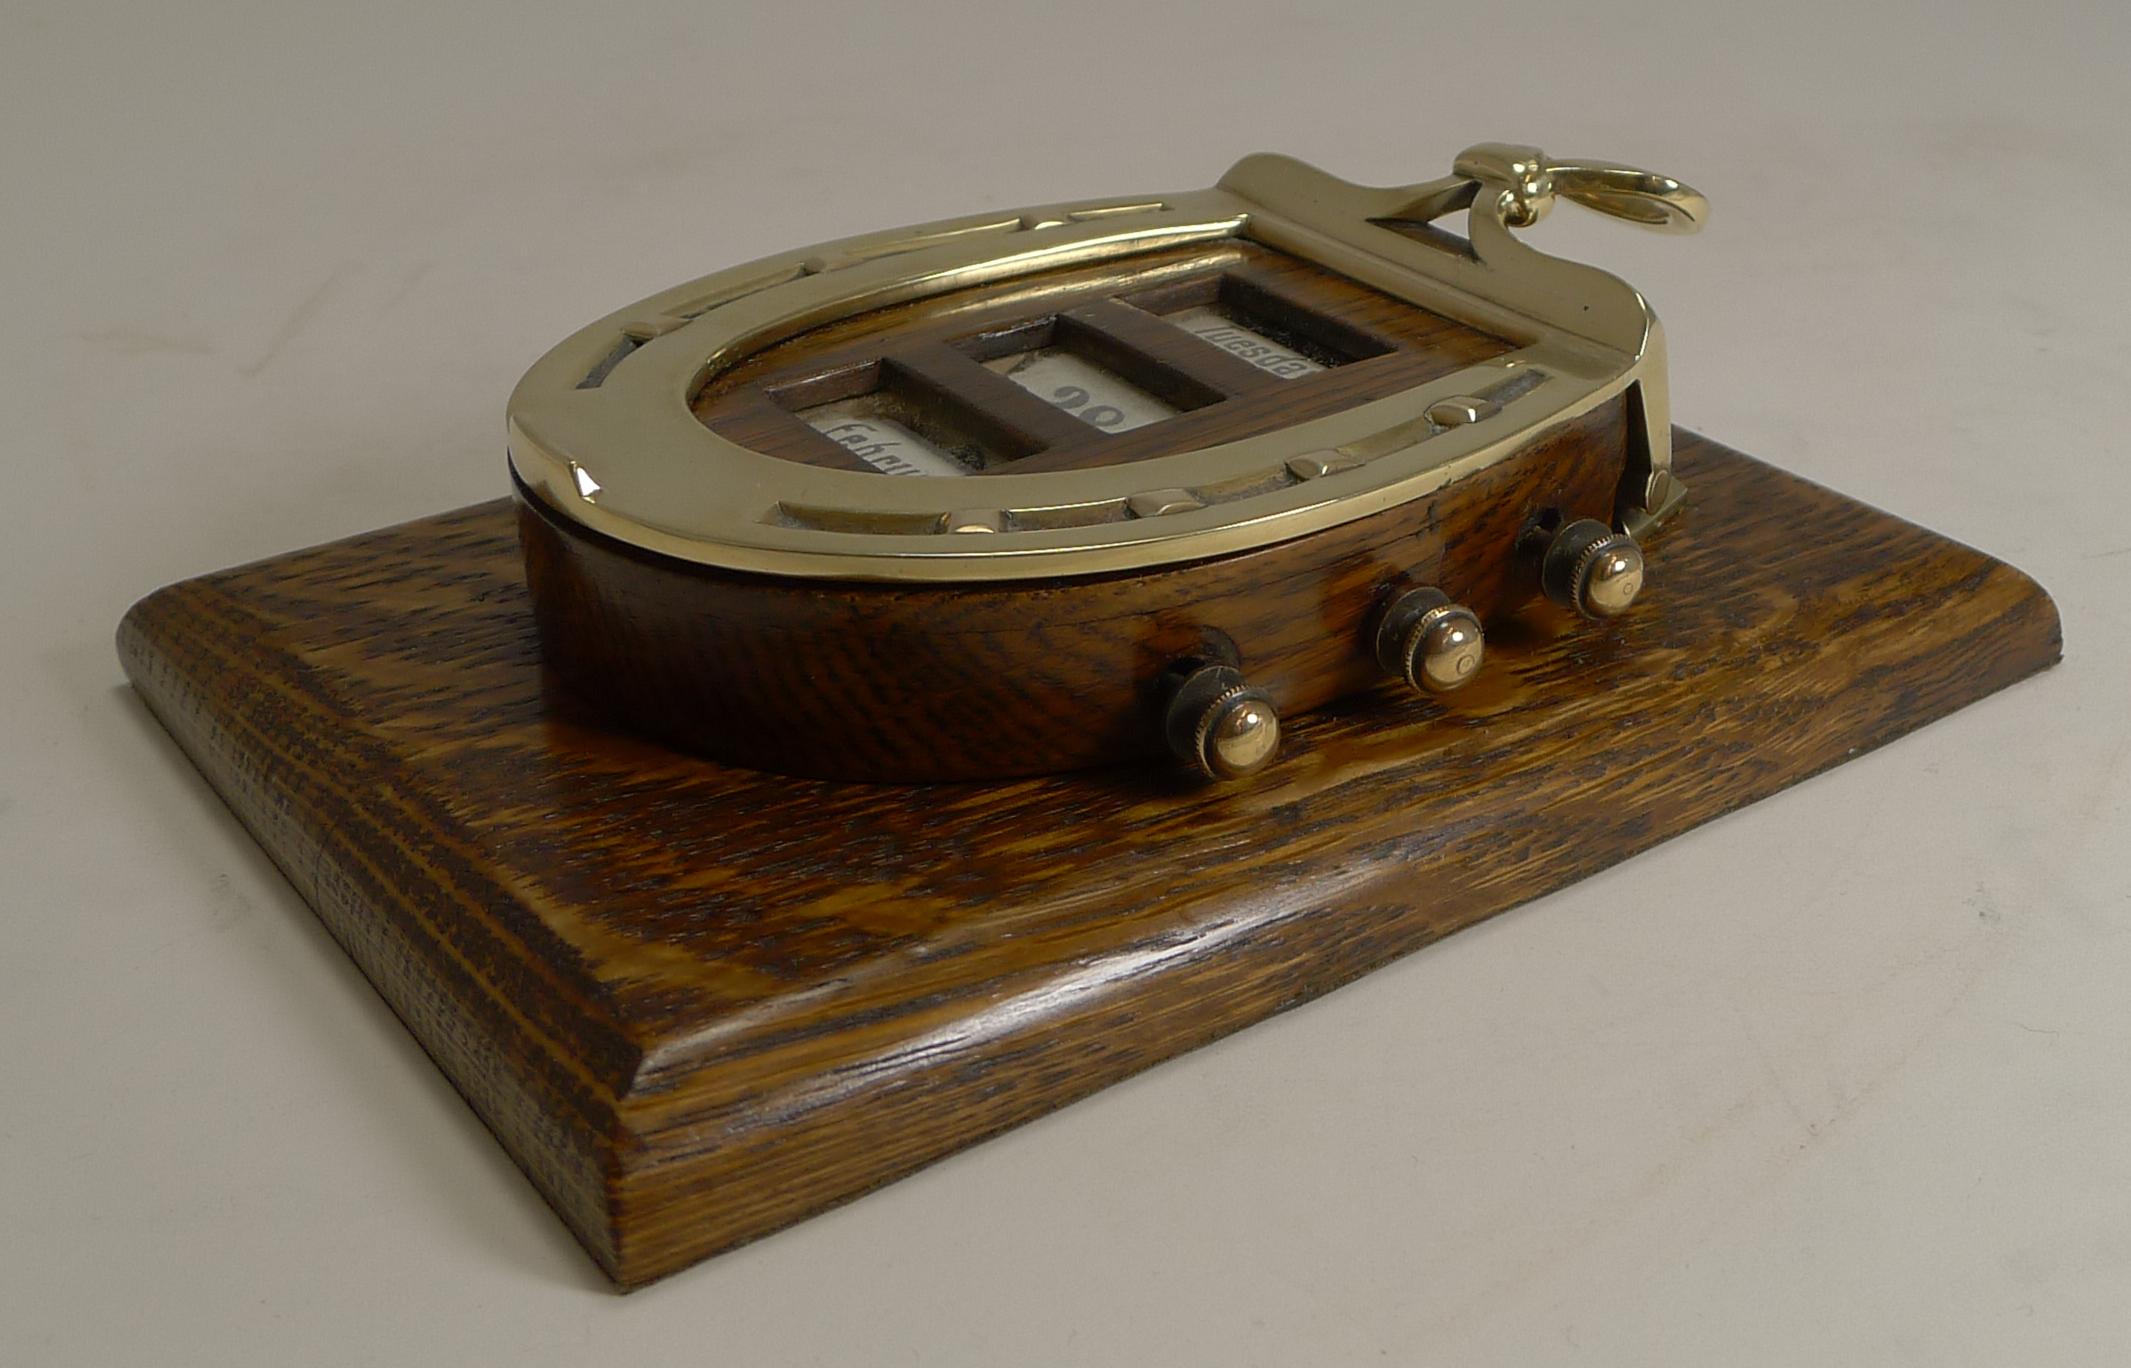 A magnificent find, I absolutely adore this gem, something I have never seen before.

Made from solid English oak and polished brass, this desk-top paper or letter clip incorporates a horseshoe shaped perpetual calendar with the brass knobs to